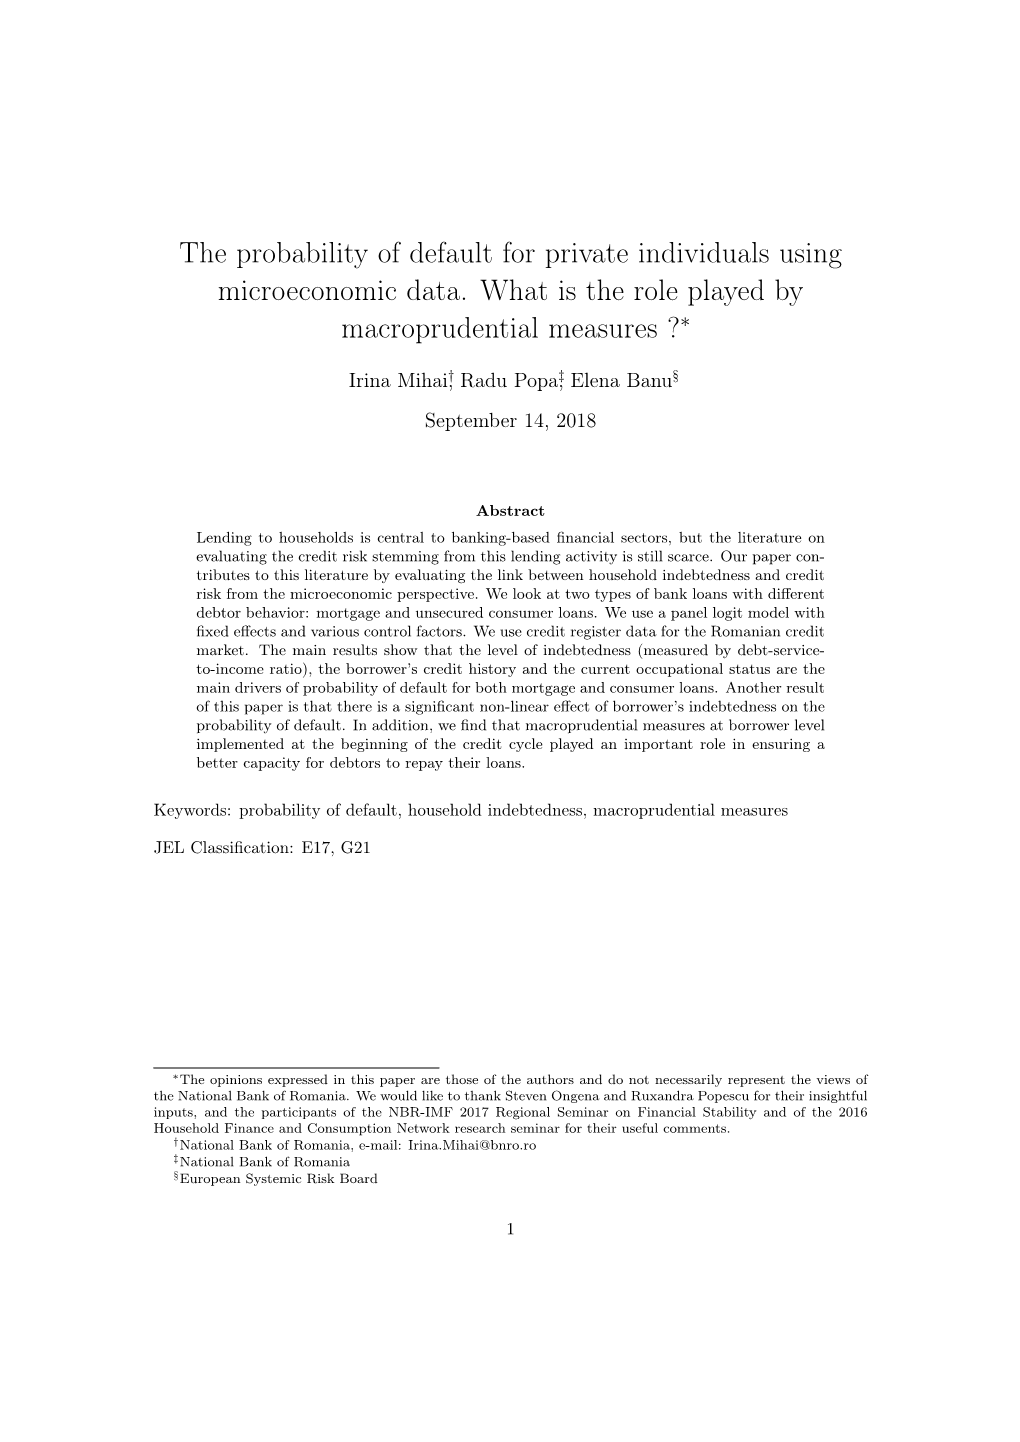 The Probability of Default for Private Individuals Using Microeconomic Data